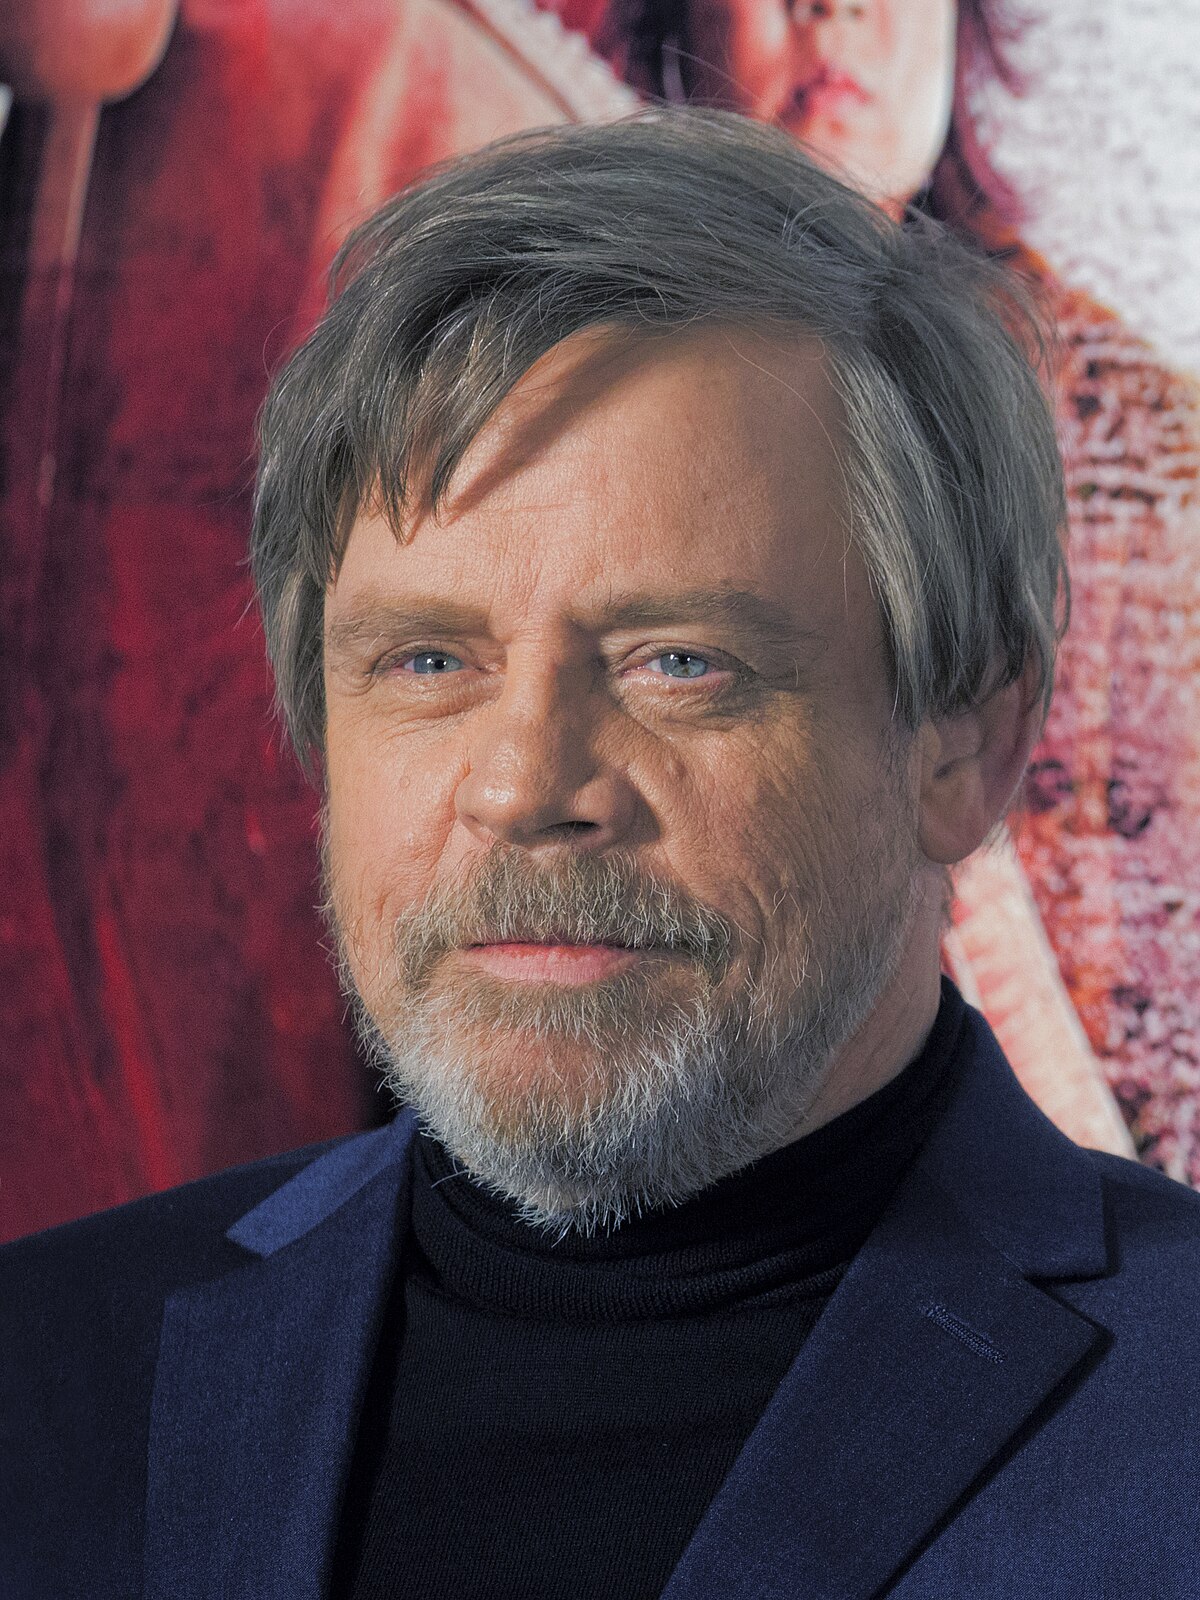 OLD Mark Hamill: a force to be reckoned with